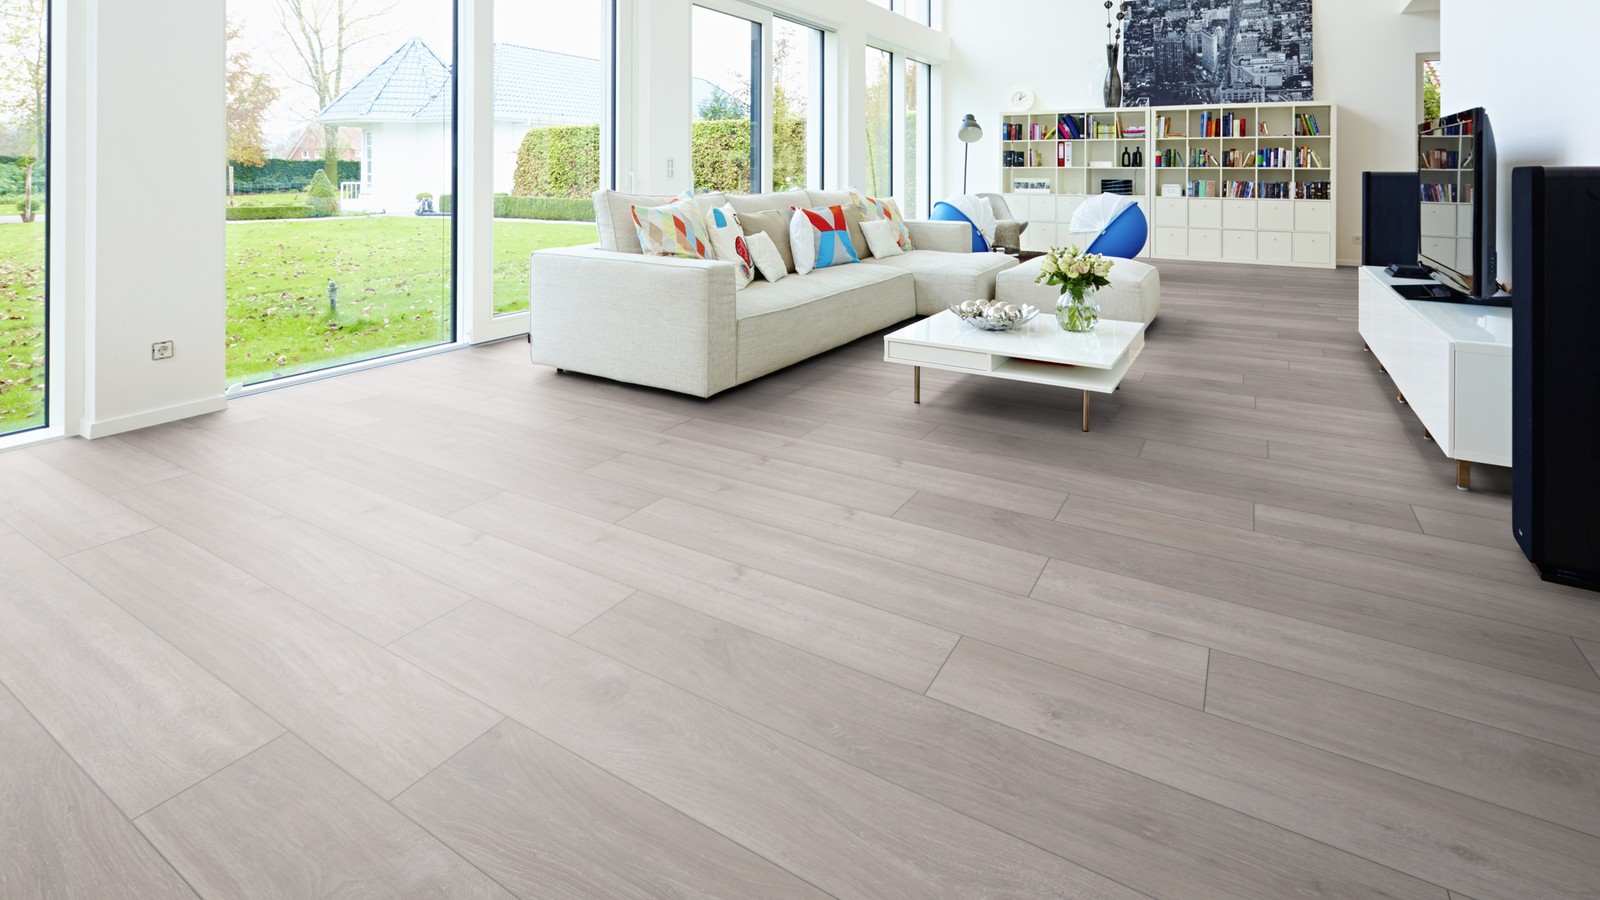 Quality Of Laminate Flooring, How To Lay Laminate Flooring In Living Room